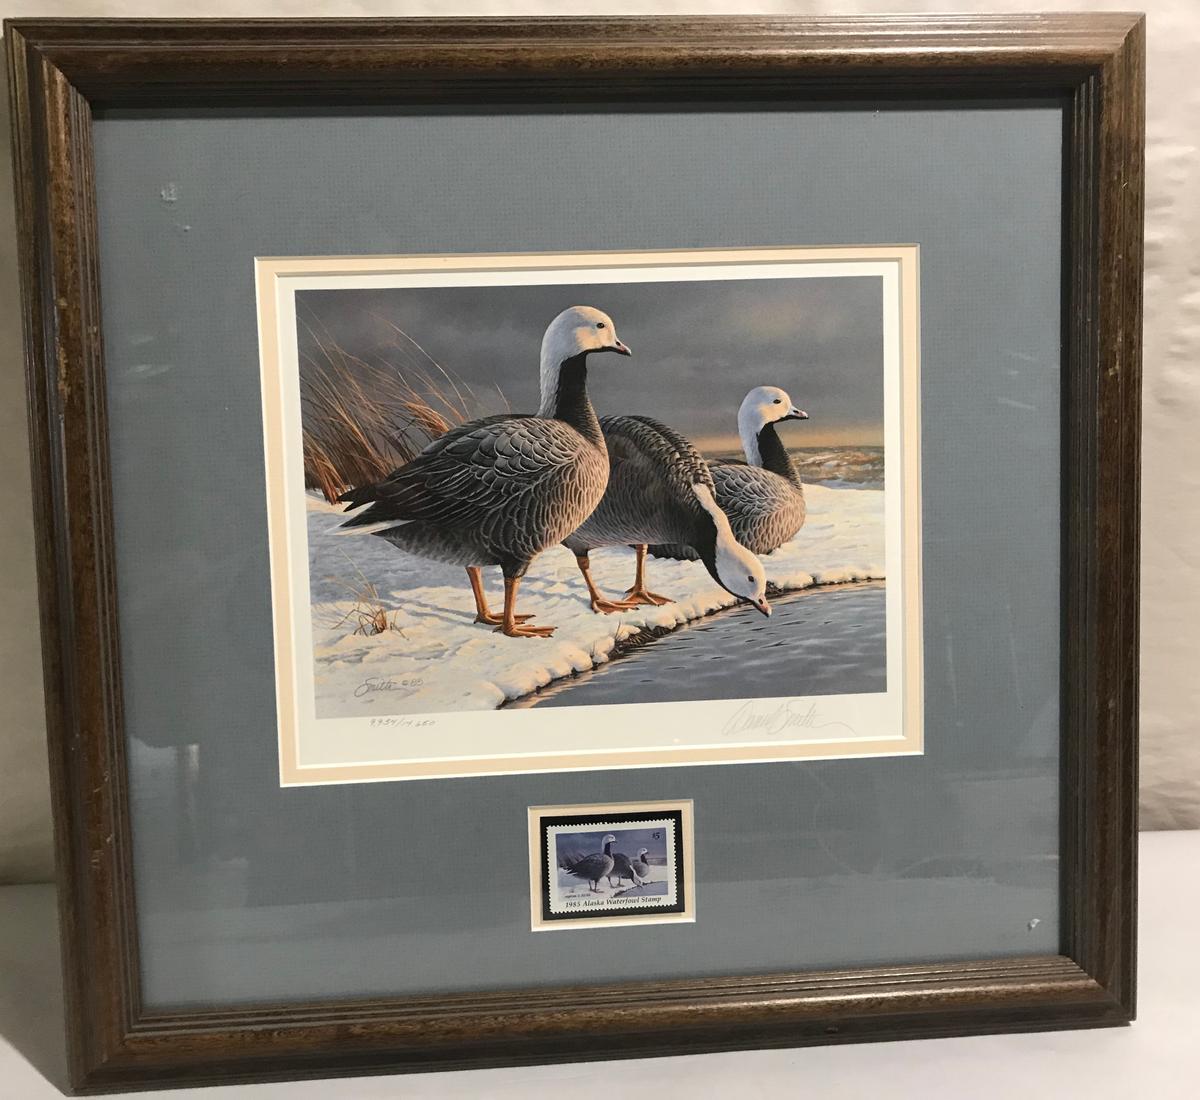 1985 Signed Federal Duck Stamp Print